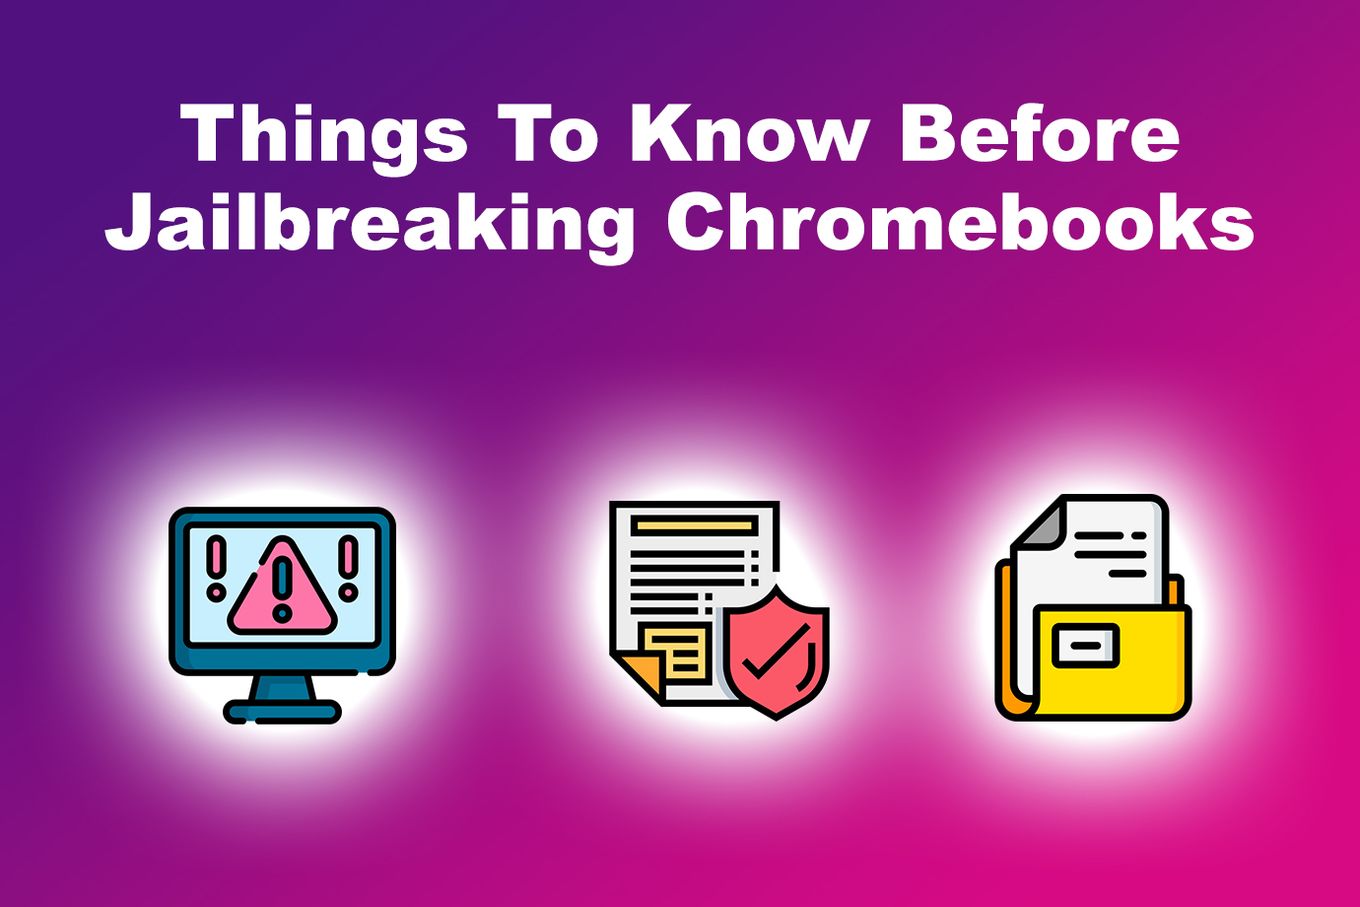 Things To Know Before Jailbreaking Chromebooks